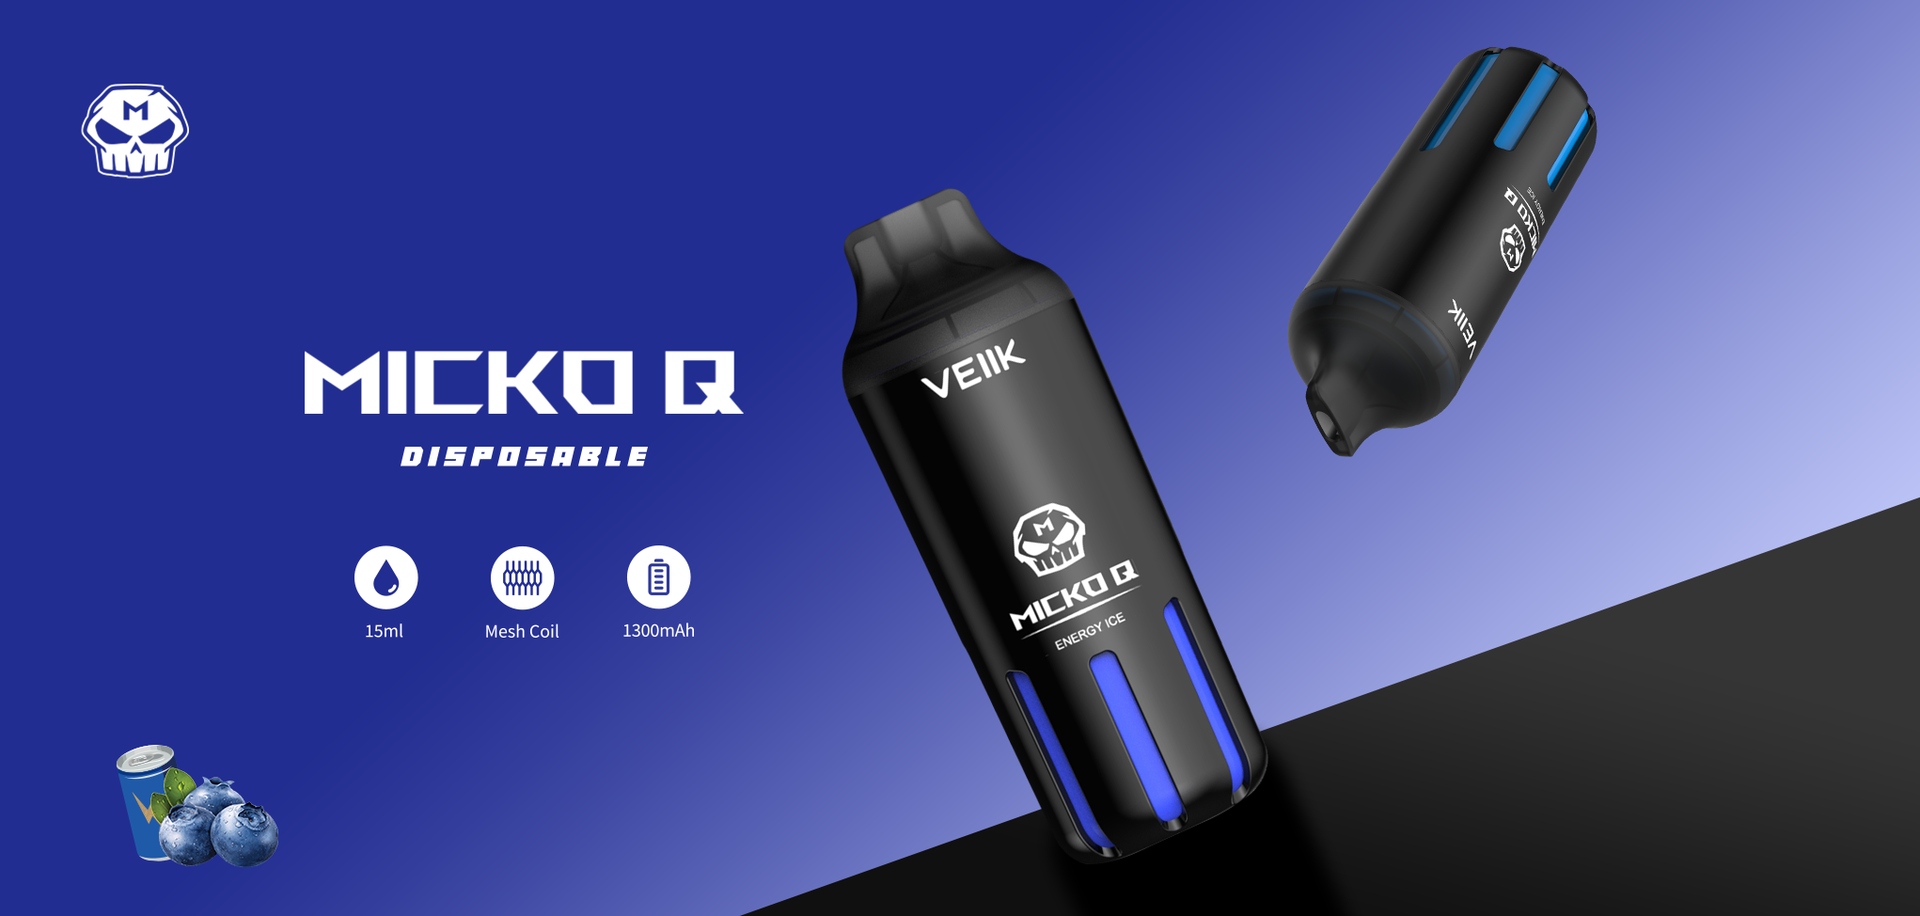 VEIIK easy to use e cigarette where to buy for sale high-end personal vaporizer